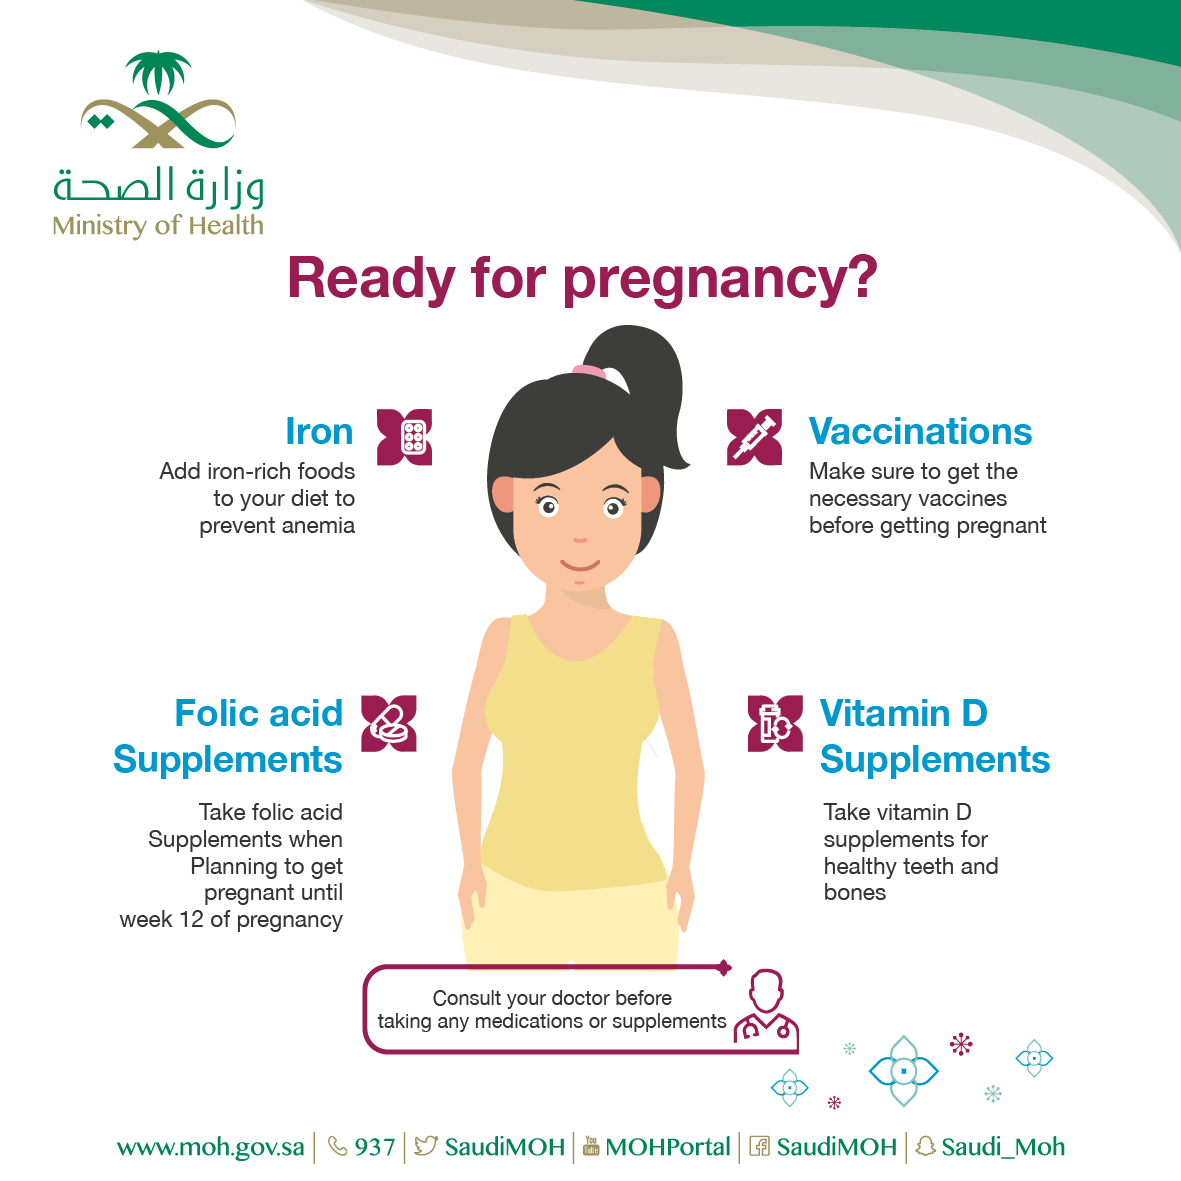 Getting the health services you need before pregnancy